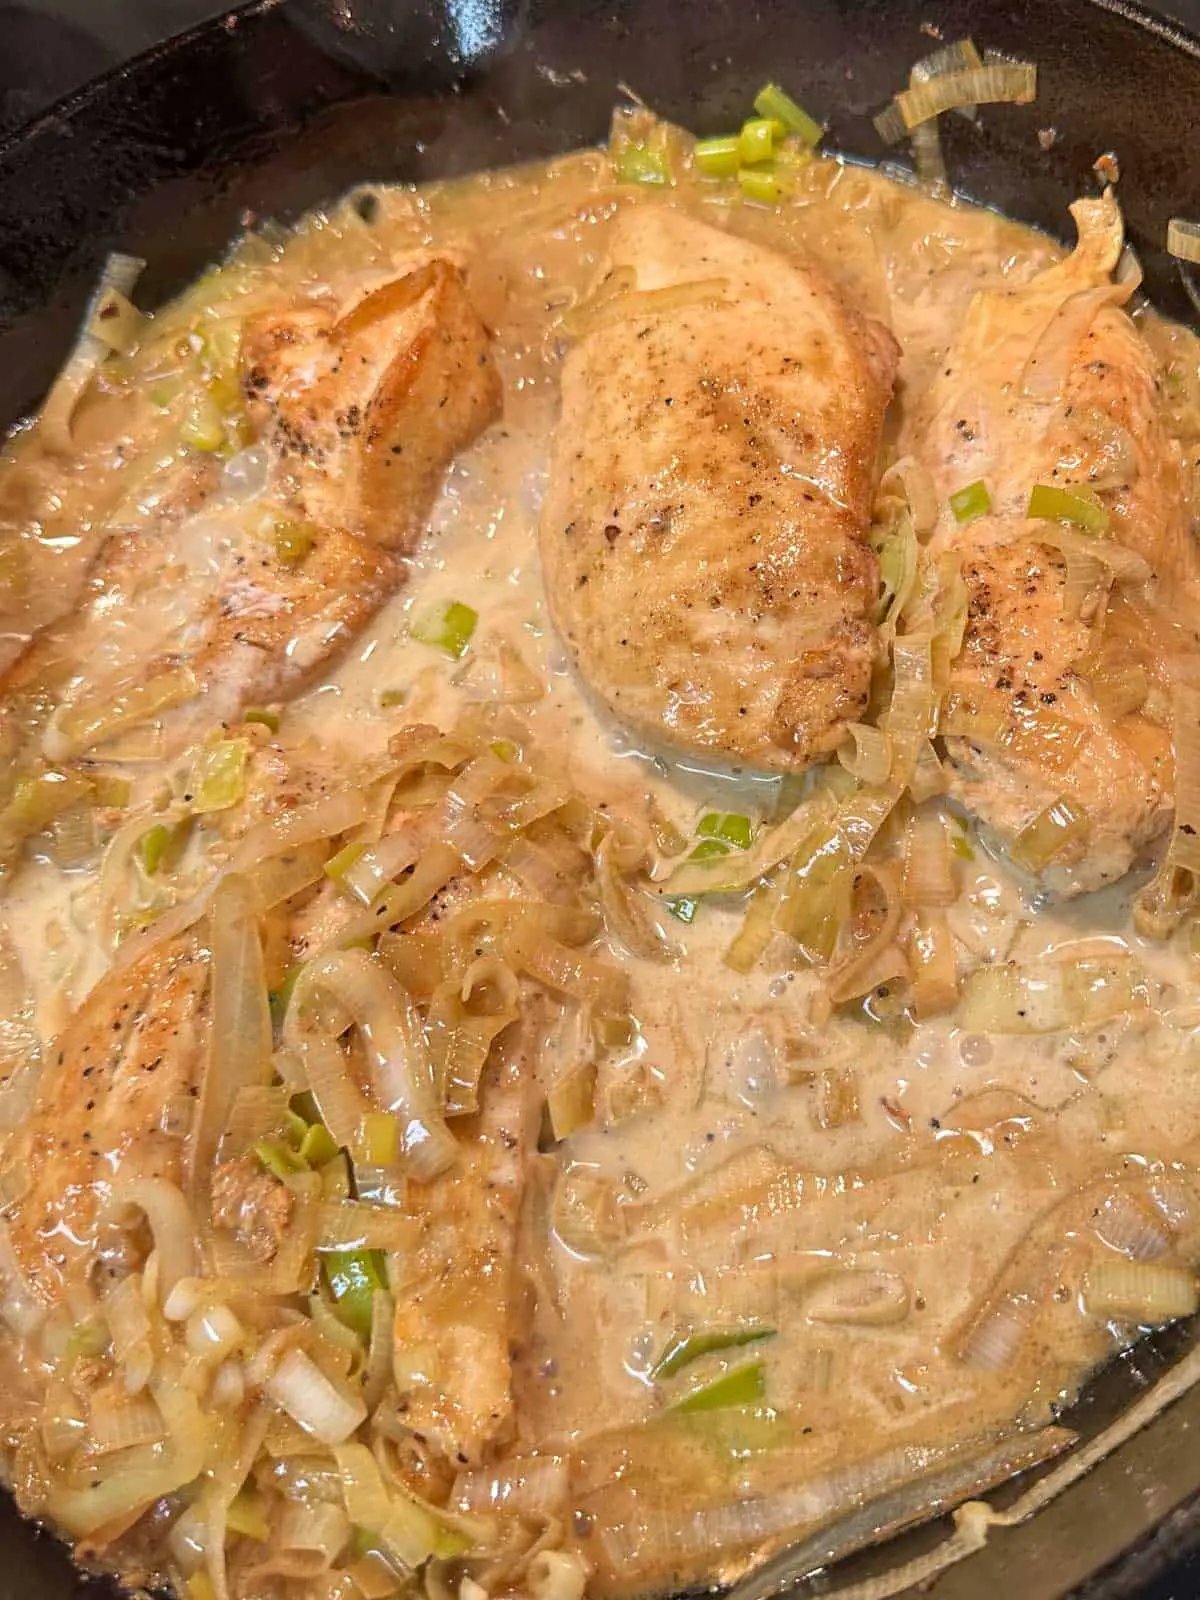 Chicken cooked with leeks in a cream sauce in a cast iron pan.